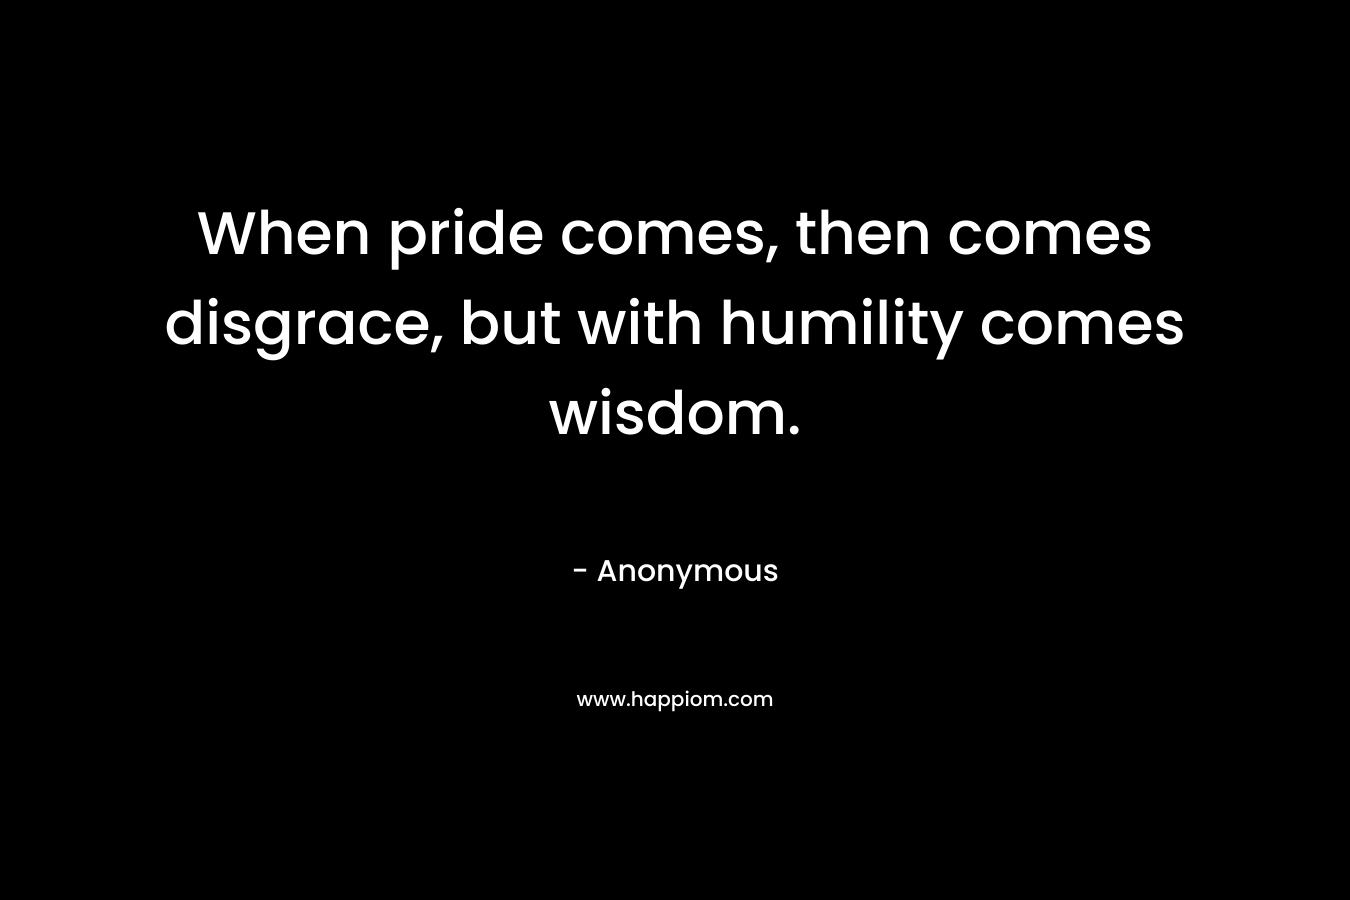 When pride comes, then comes disgrace, but with humility comes wisdom.